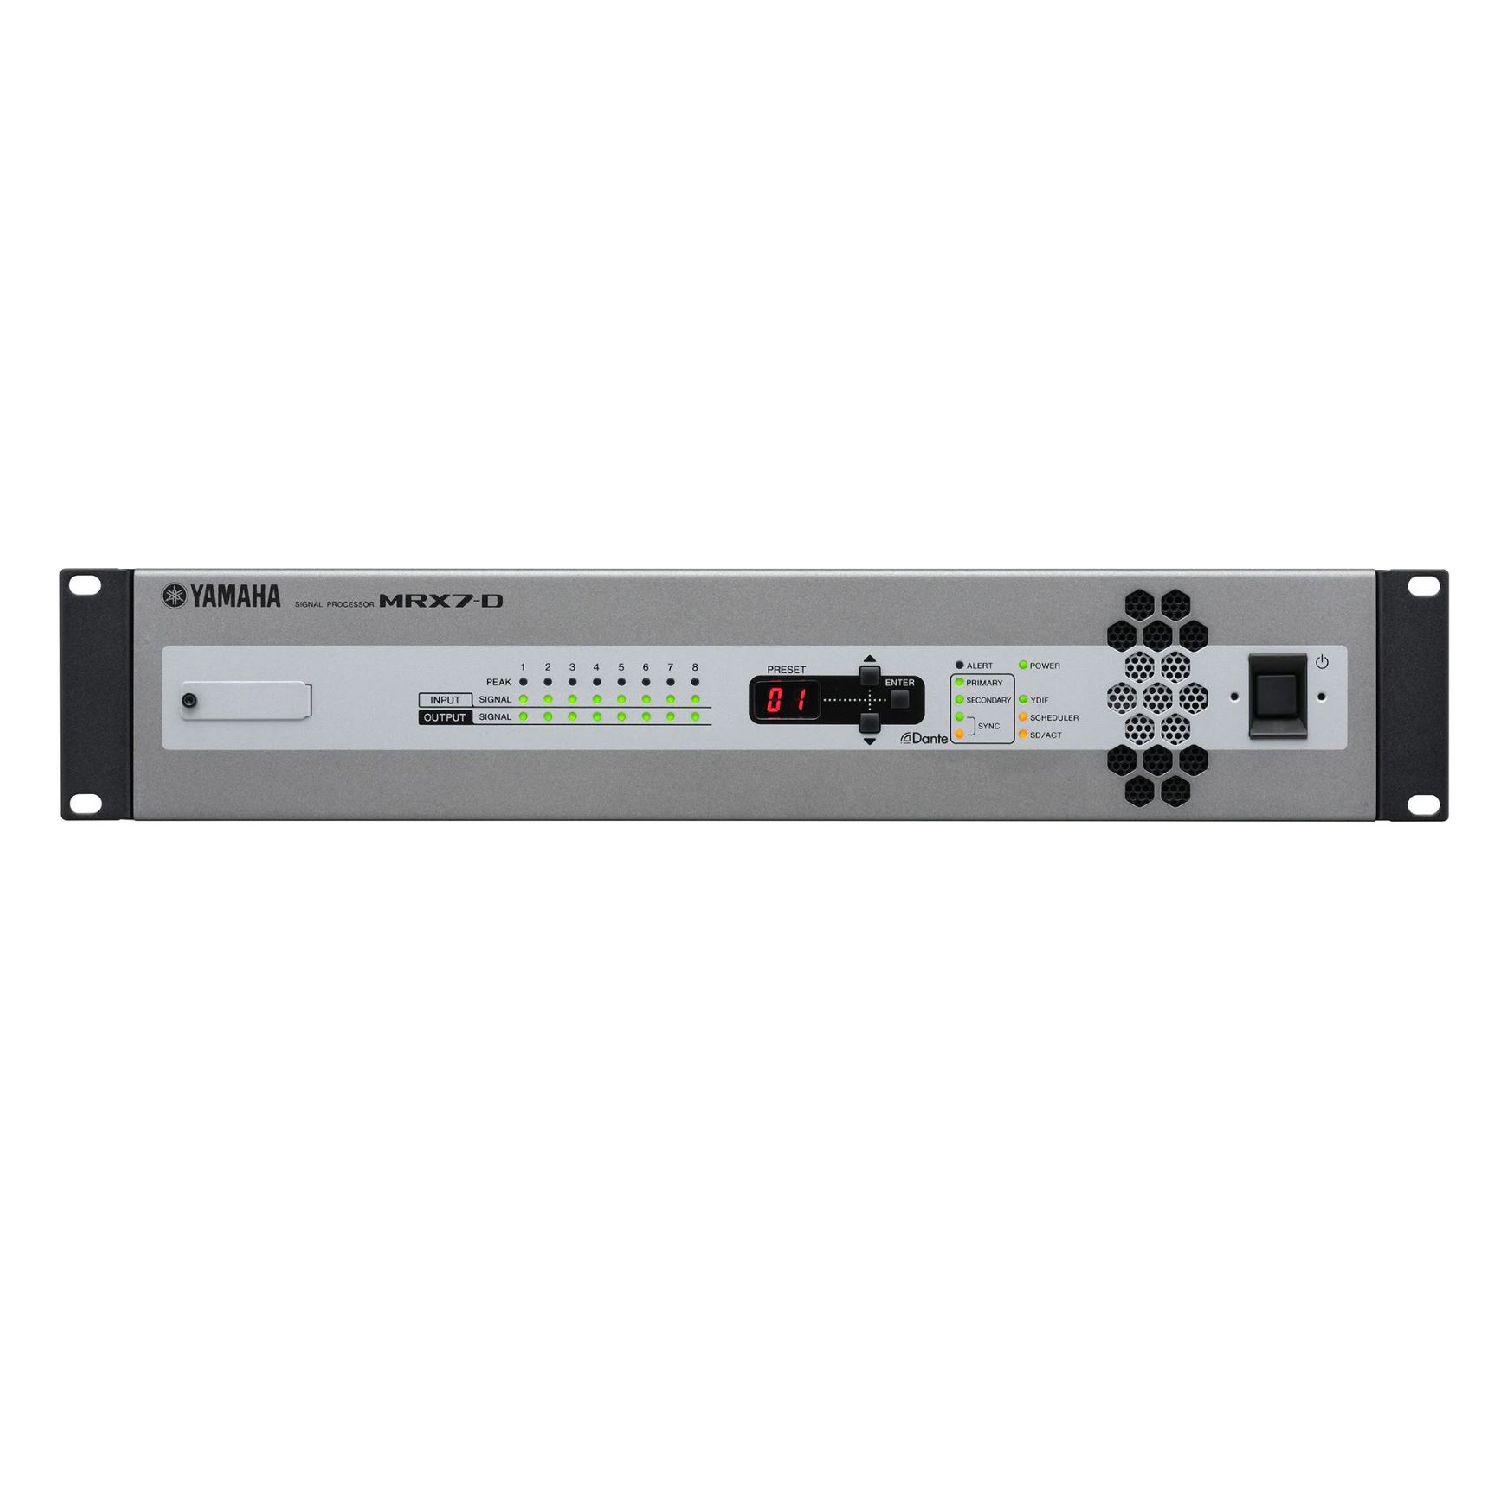 DSP Signal Processor Support for AES67, Dante Device Lock   MRX7 D yamaha